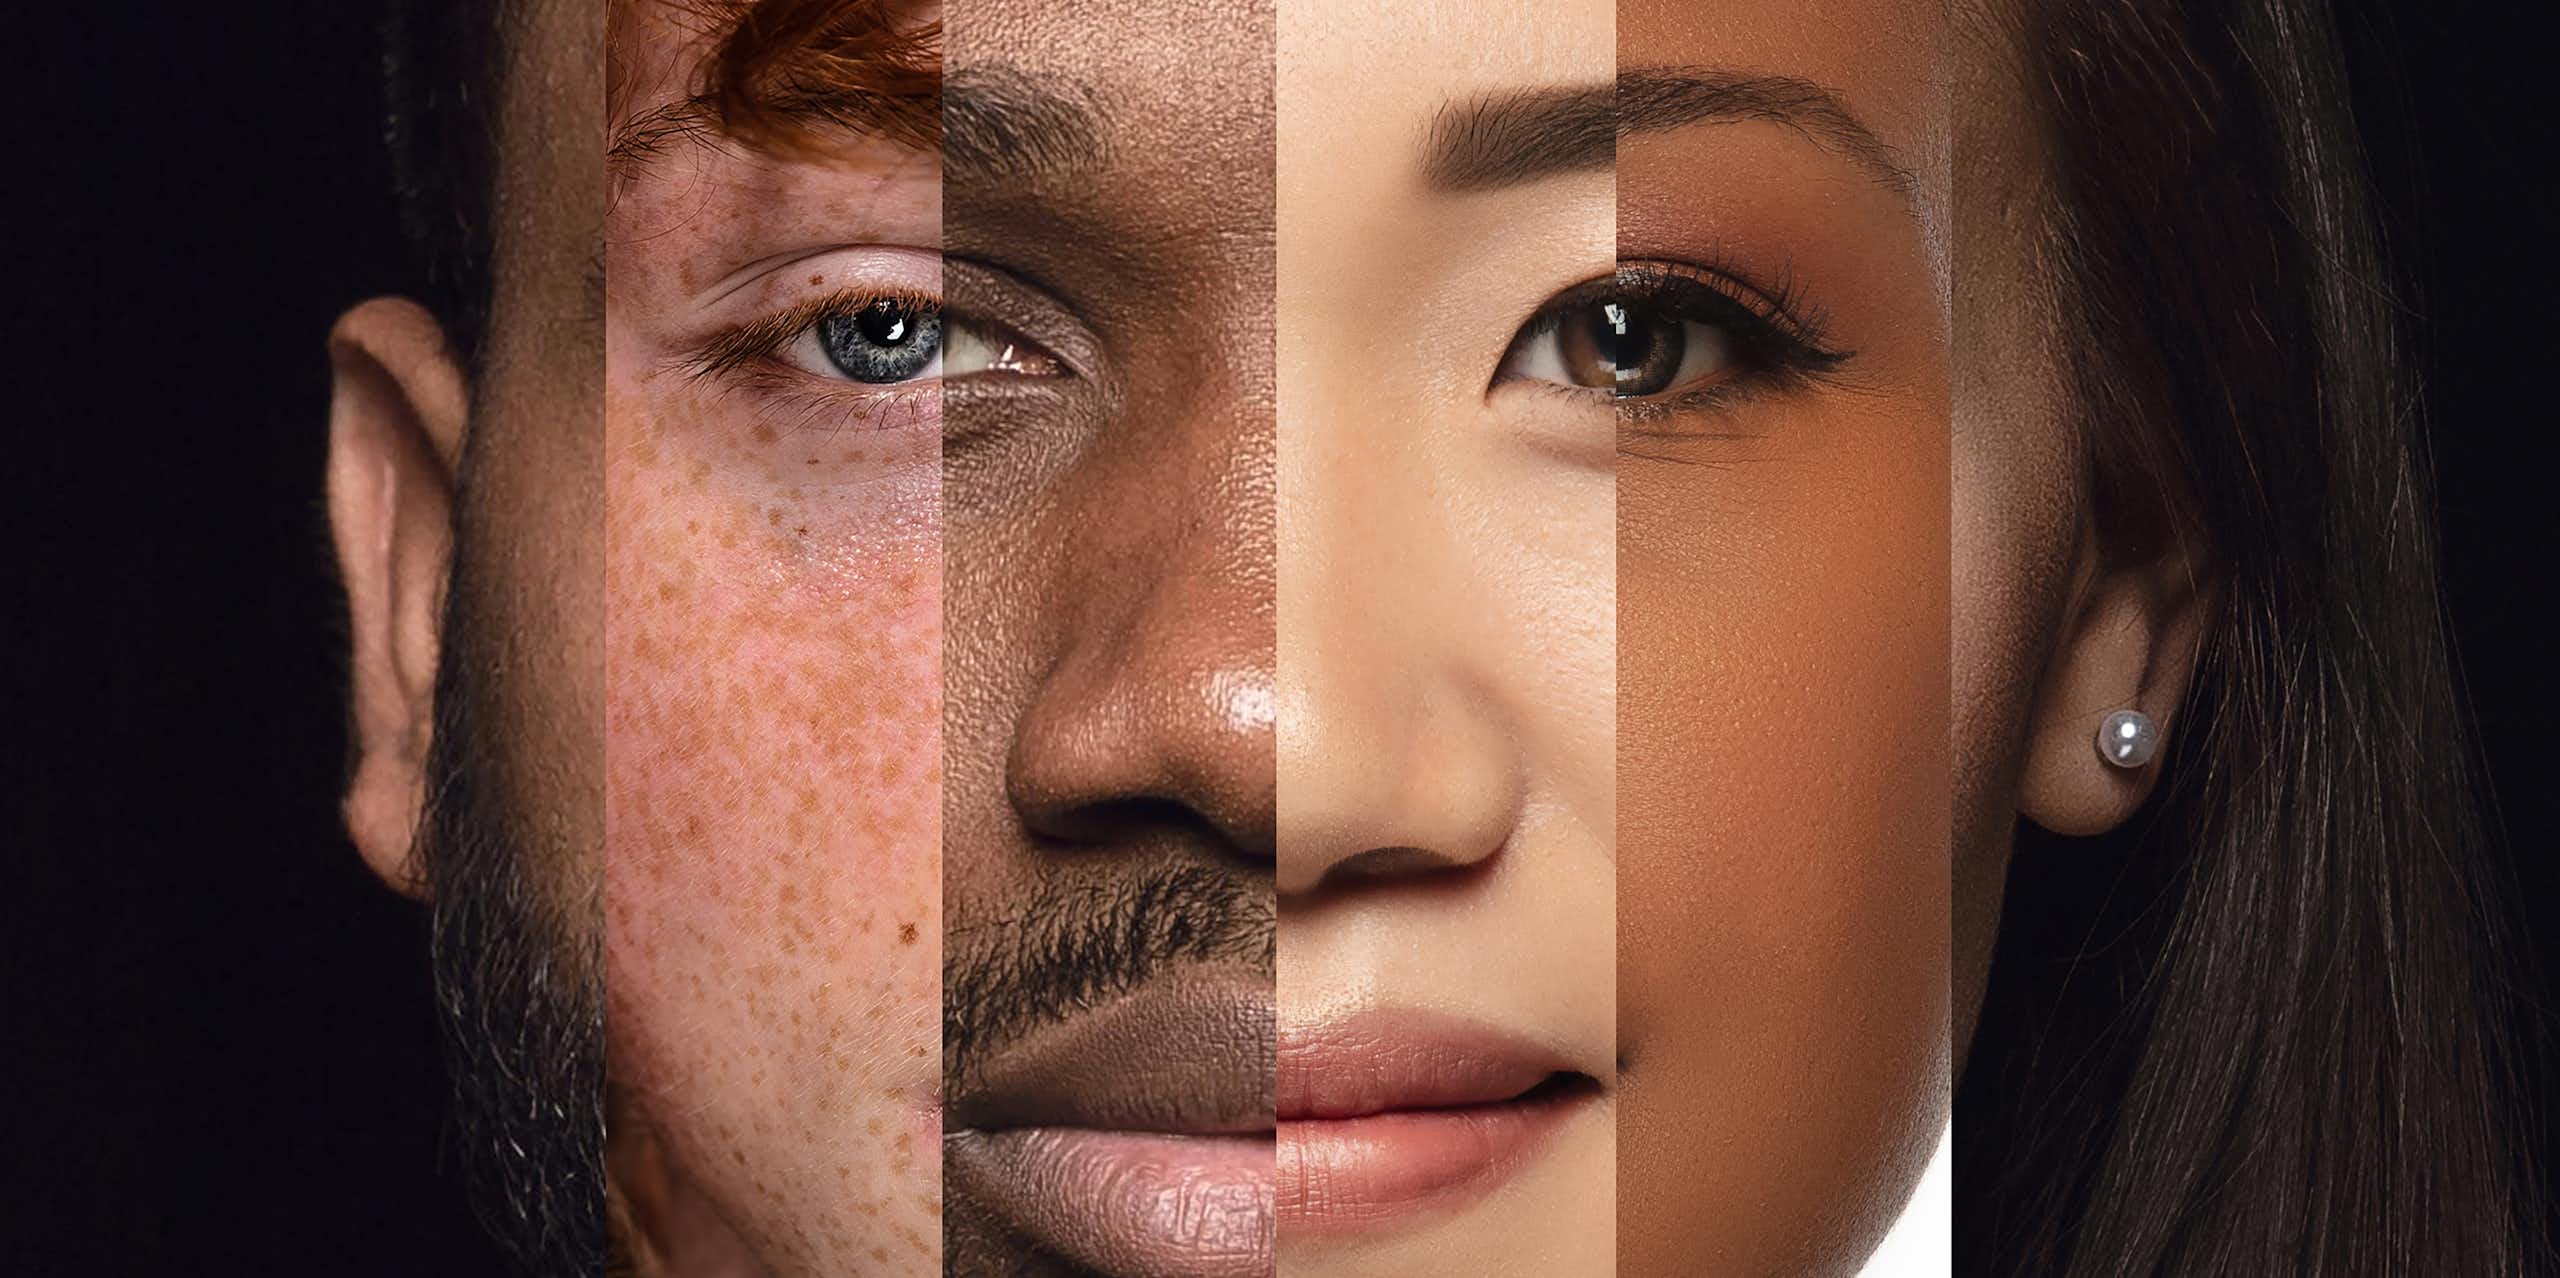 Human face made from different portraits of men and women of diverse age and race.